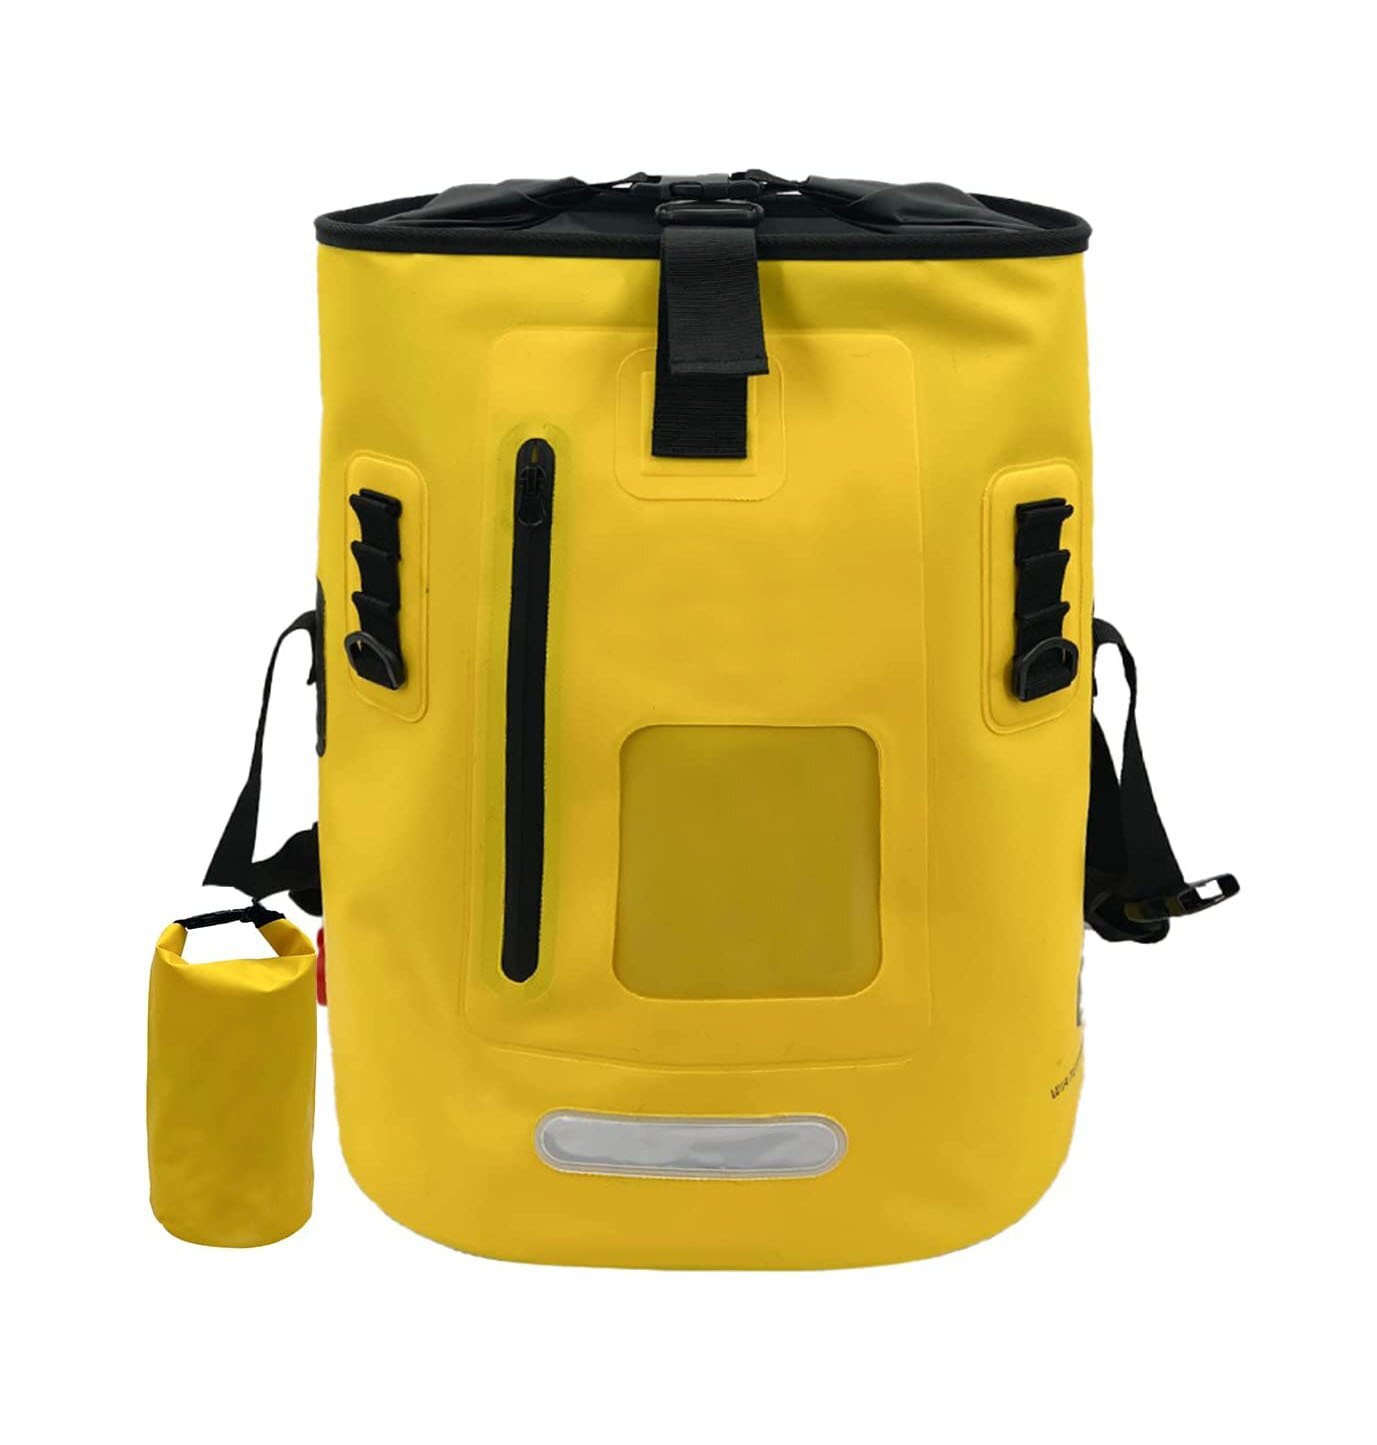 Waterproof Backpack Dry Bag Waterproof Closure with Cushioned Padded Back Panel for Women Men